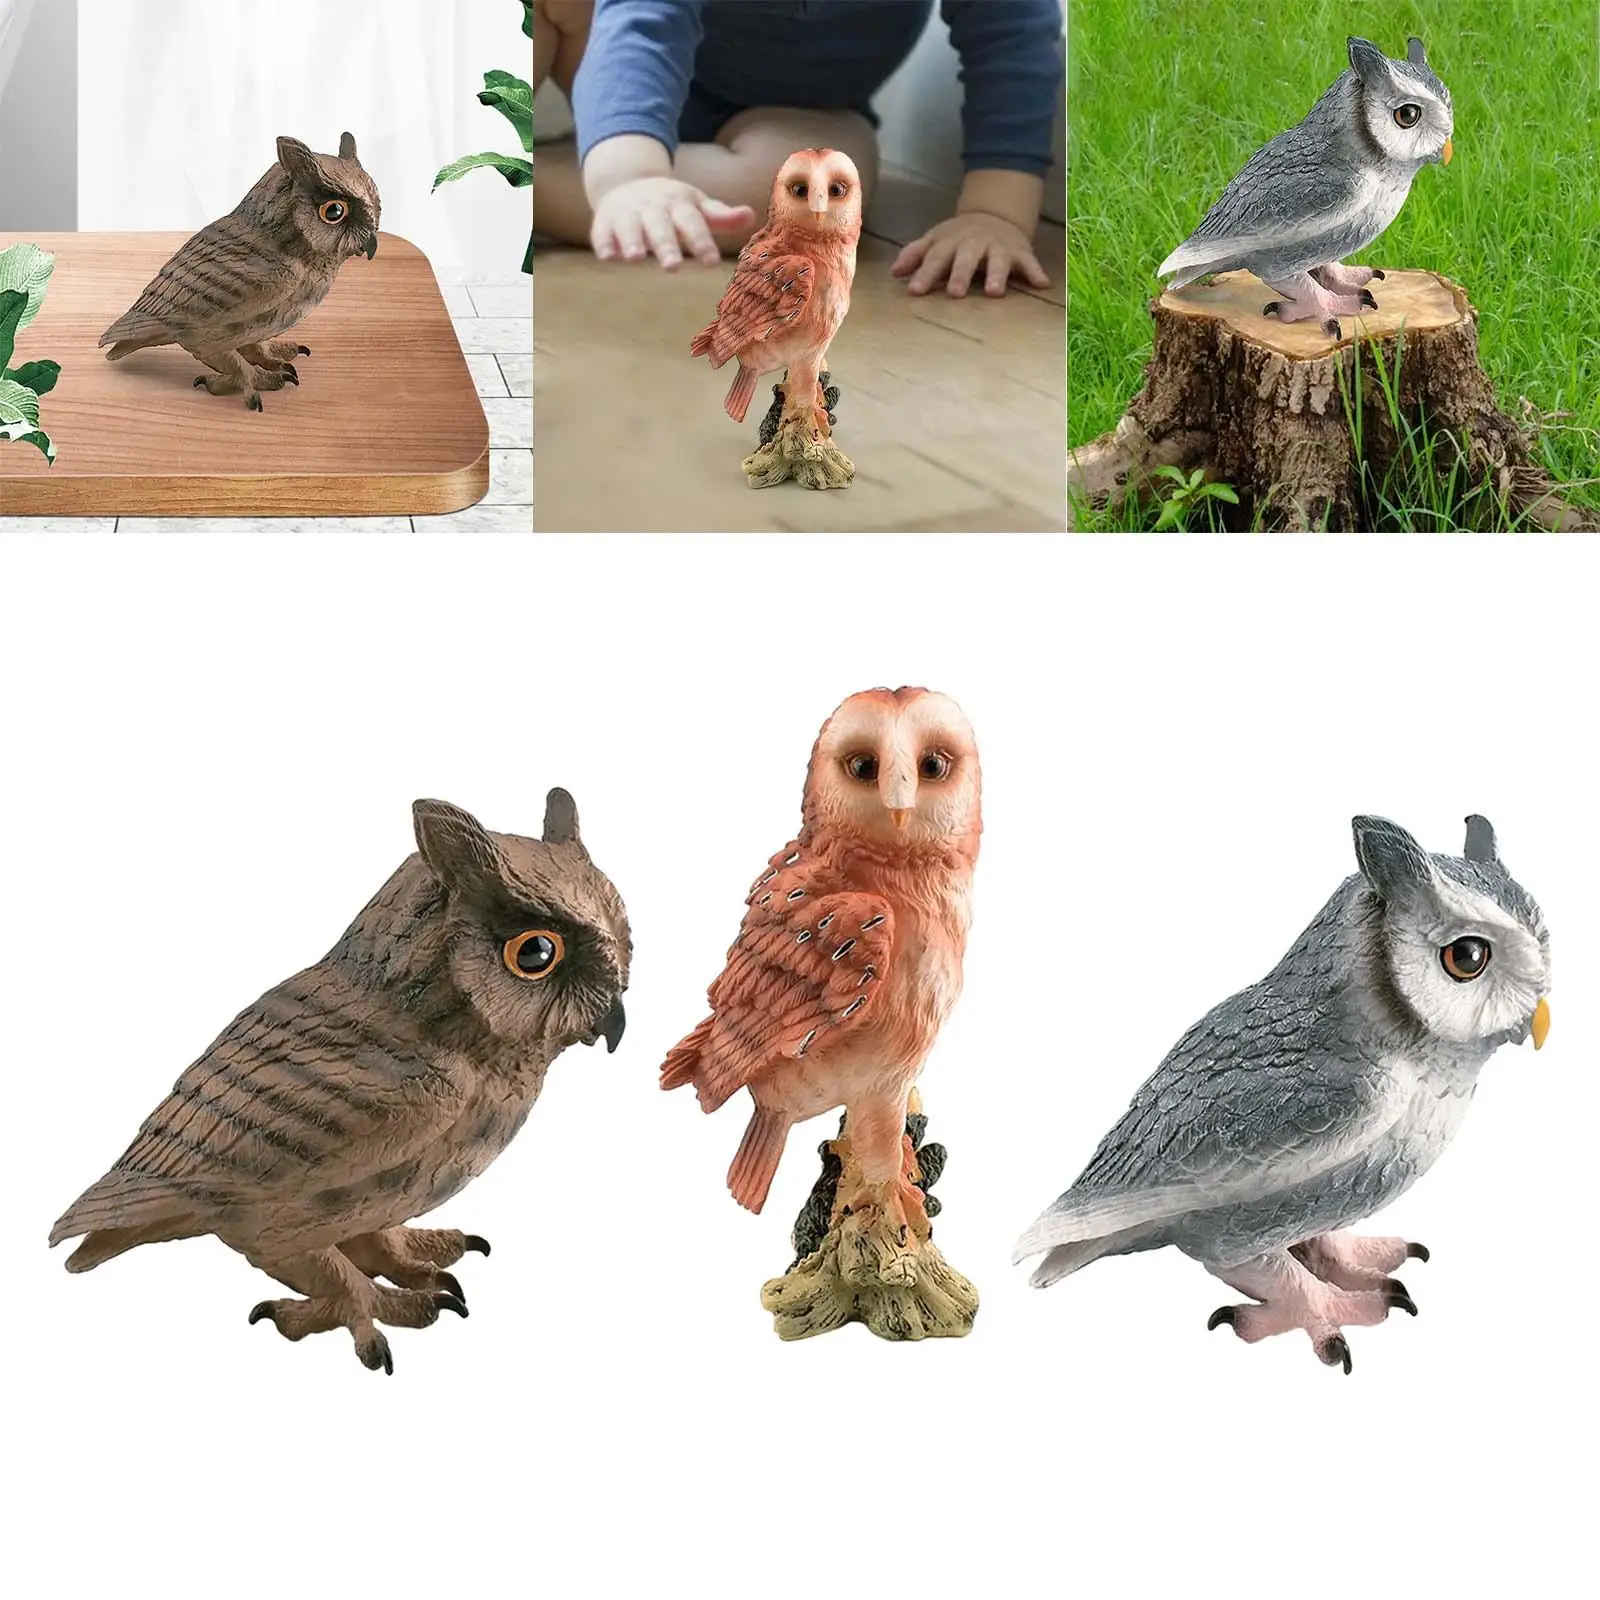 Simulation Owl Model Collection Playset Desktop Decor for Teaching Materials Decor Educational Birthday Gift Yard Decors